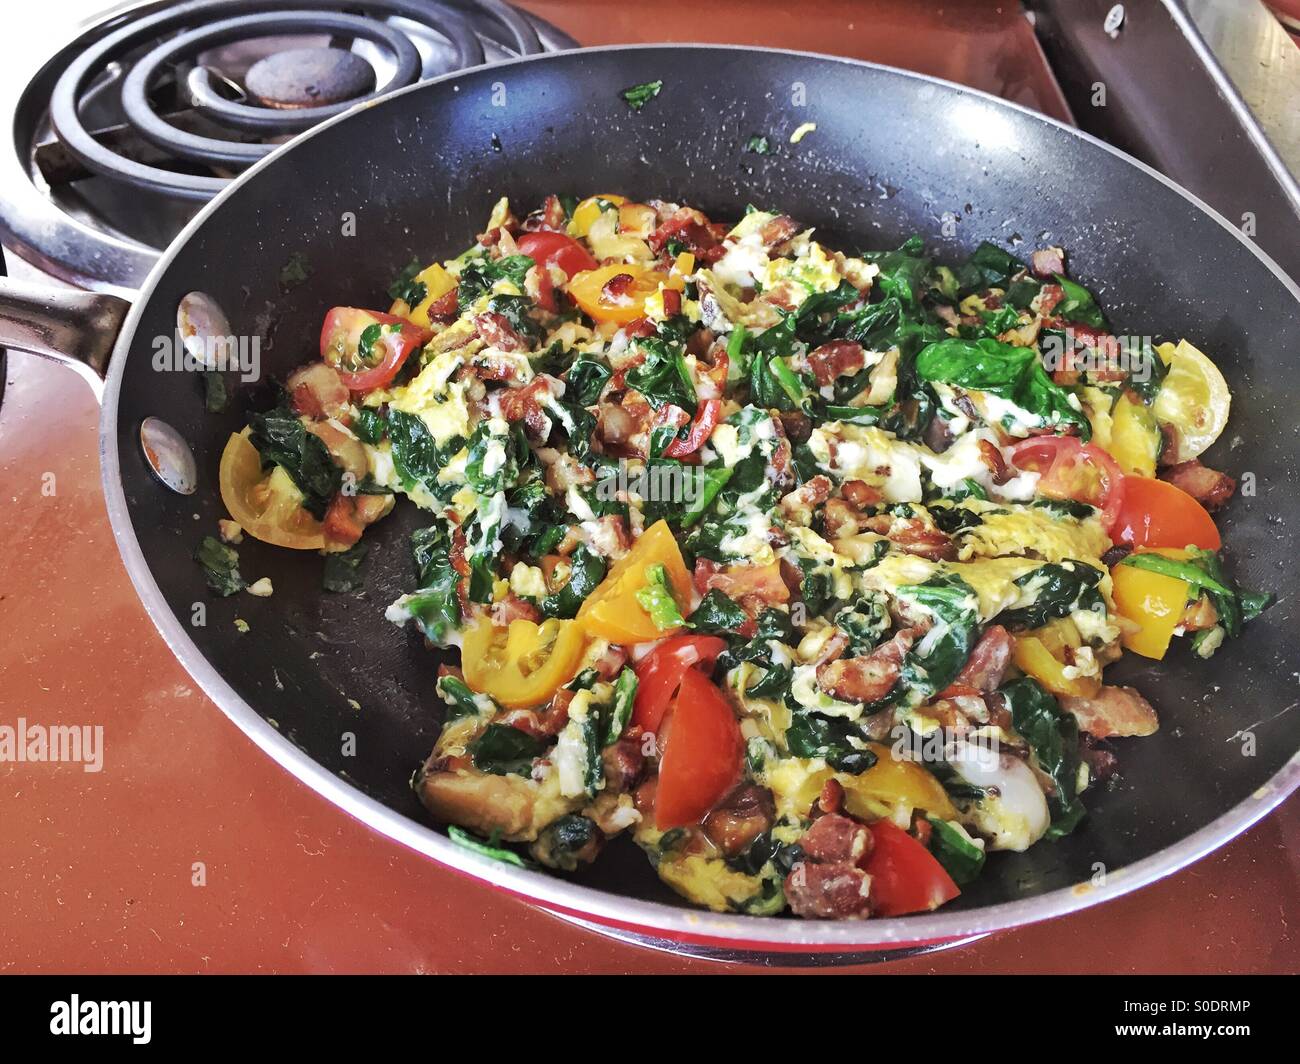 Breakfast scramble with bacon, shiitake mushrooms, spinach, and tomatoes . Stock Photo